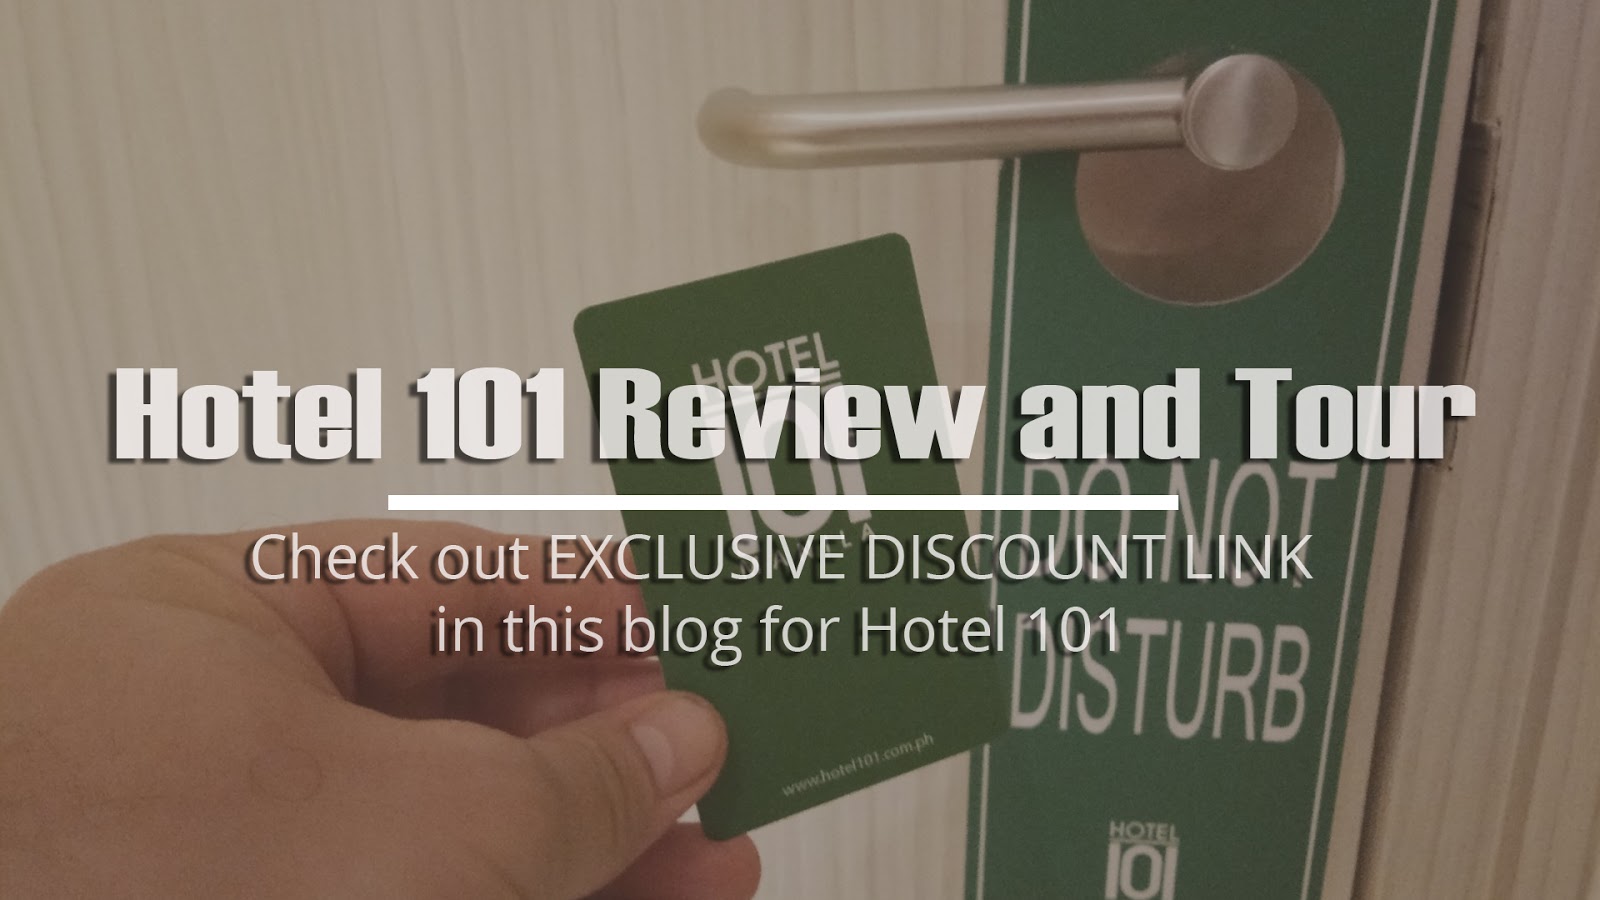 Hotel 101 Review and Tour